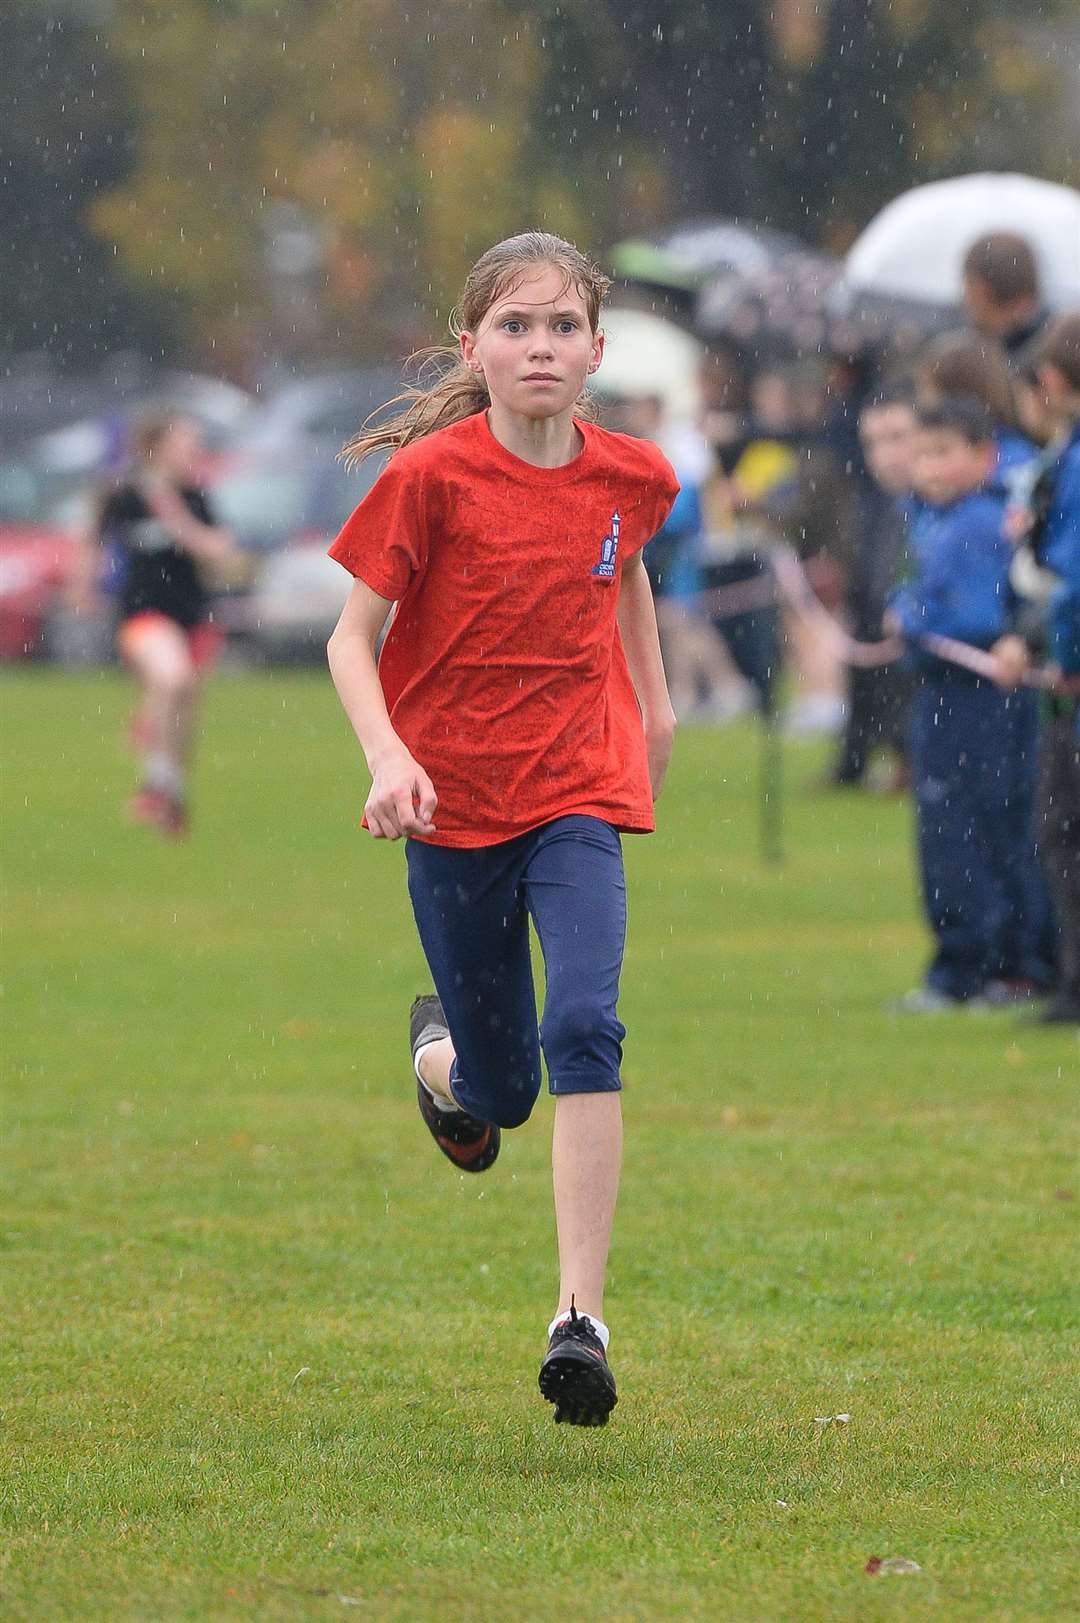 Even going back to her days at Crown Primary School, Megan Keith was competing for medals in orienteering. Picture: Callum Mackay